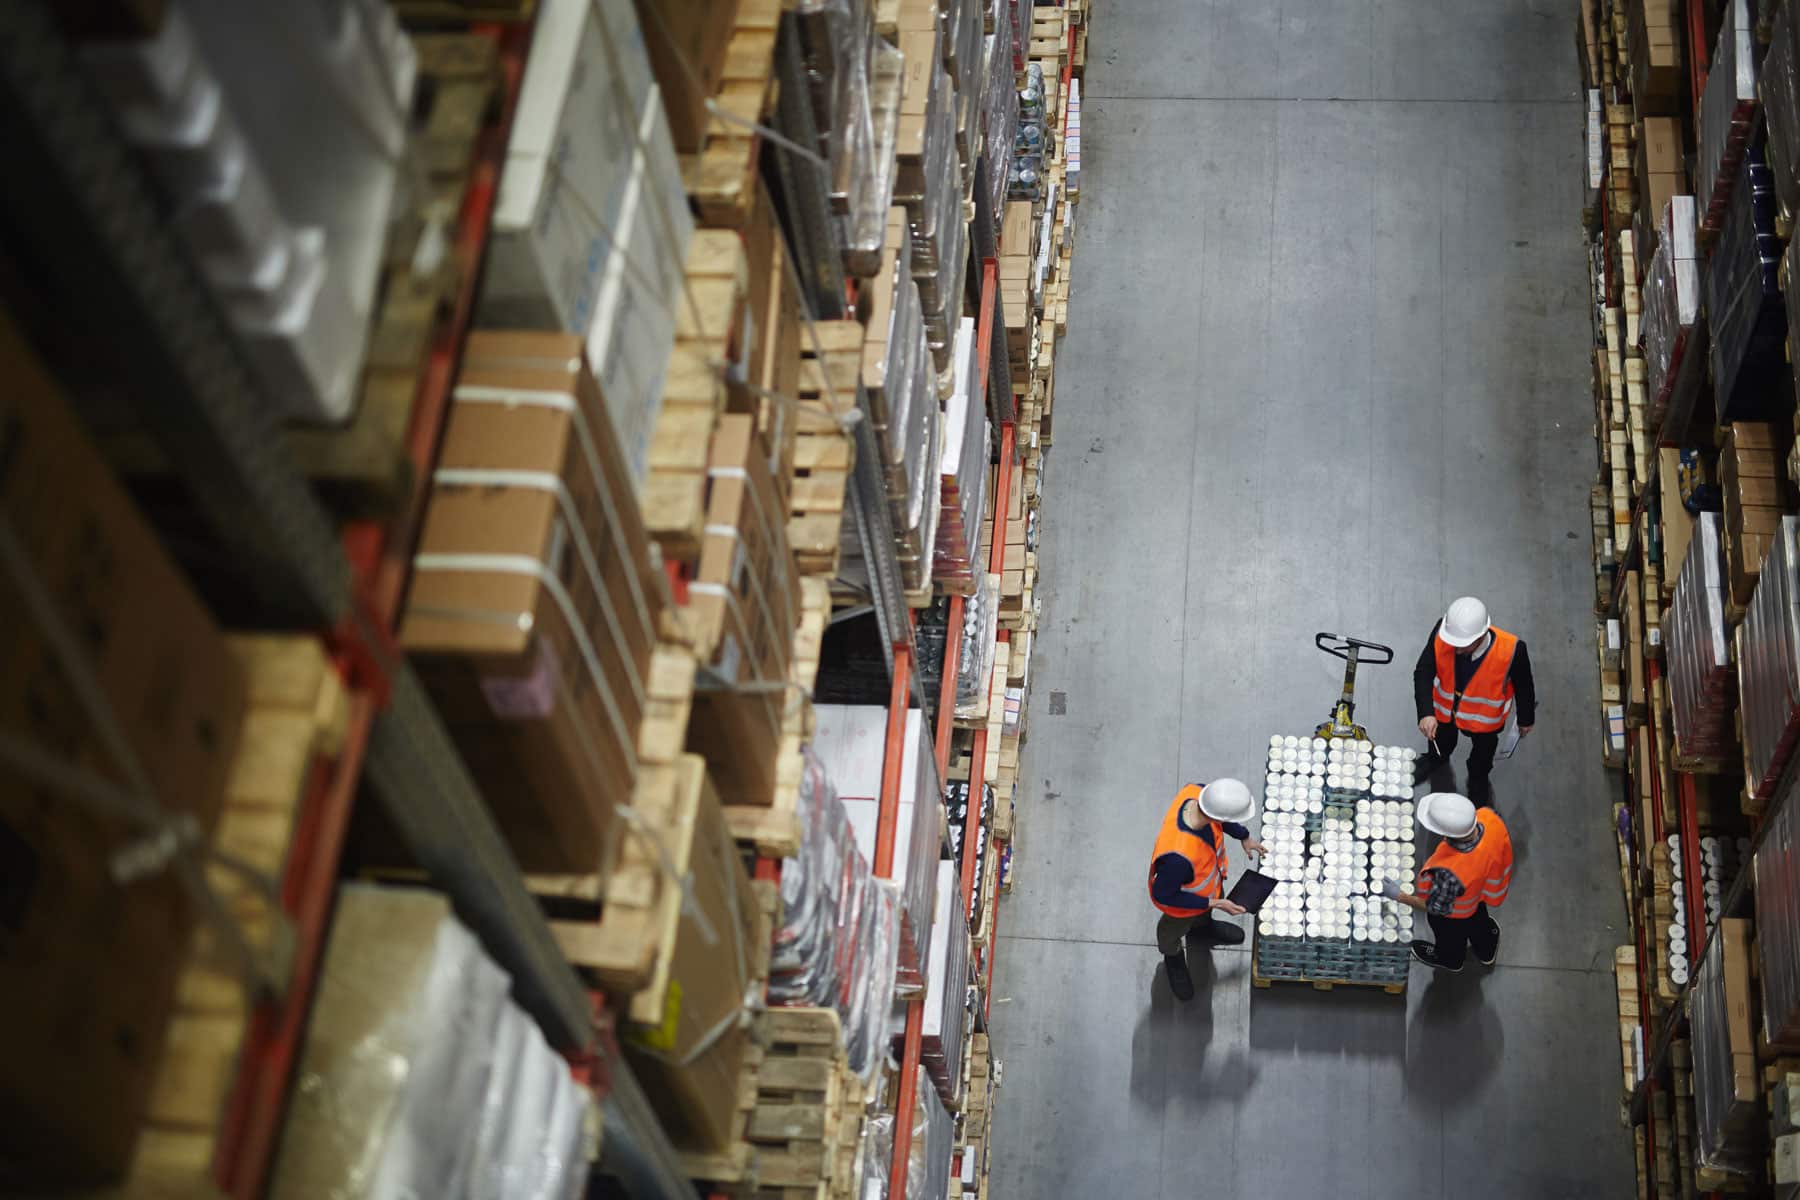 Workers in a distribution warehouse